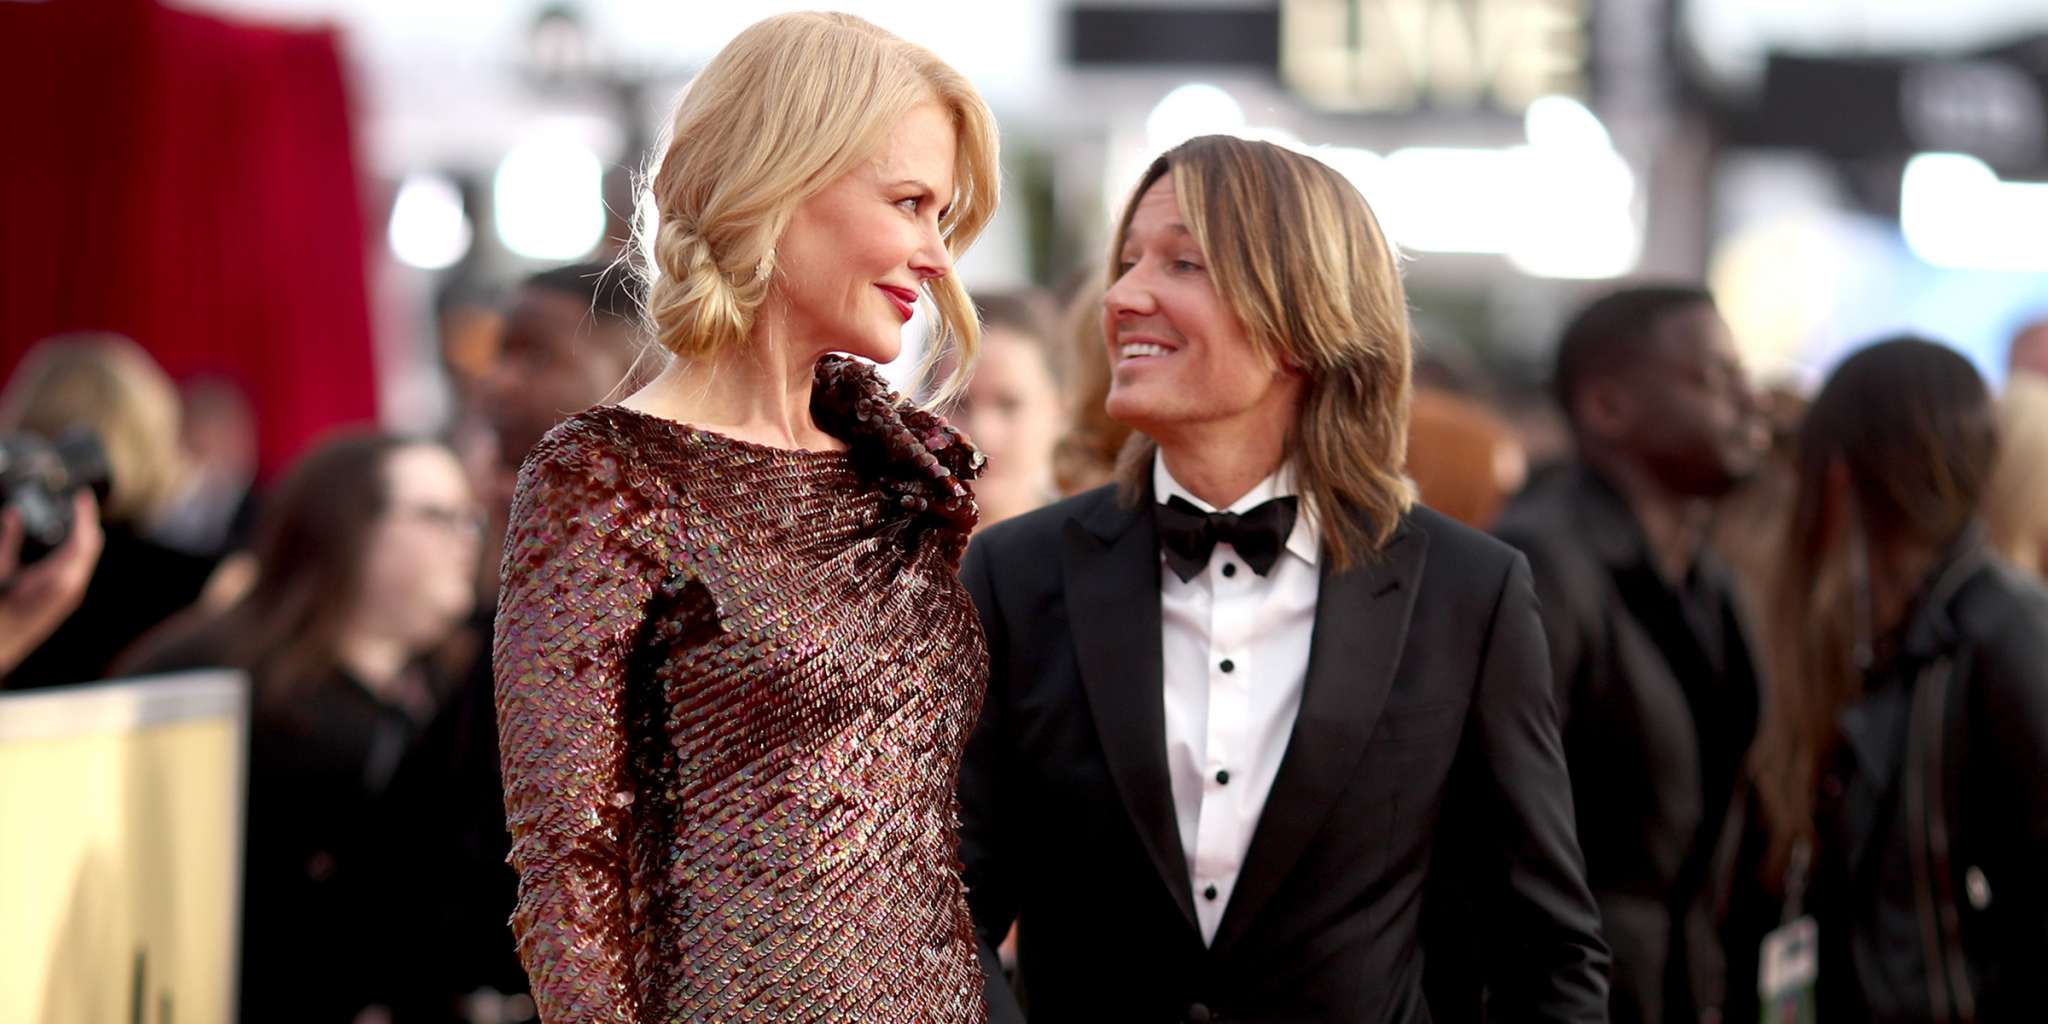 ”nicole-kidman-and-keith-urban-celebrate-16th-wedding-anniversary-posting-a-beautiful-picture-on-instagram”